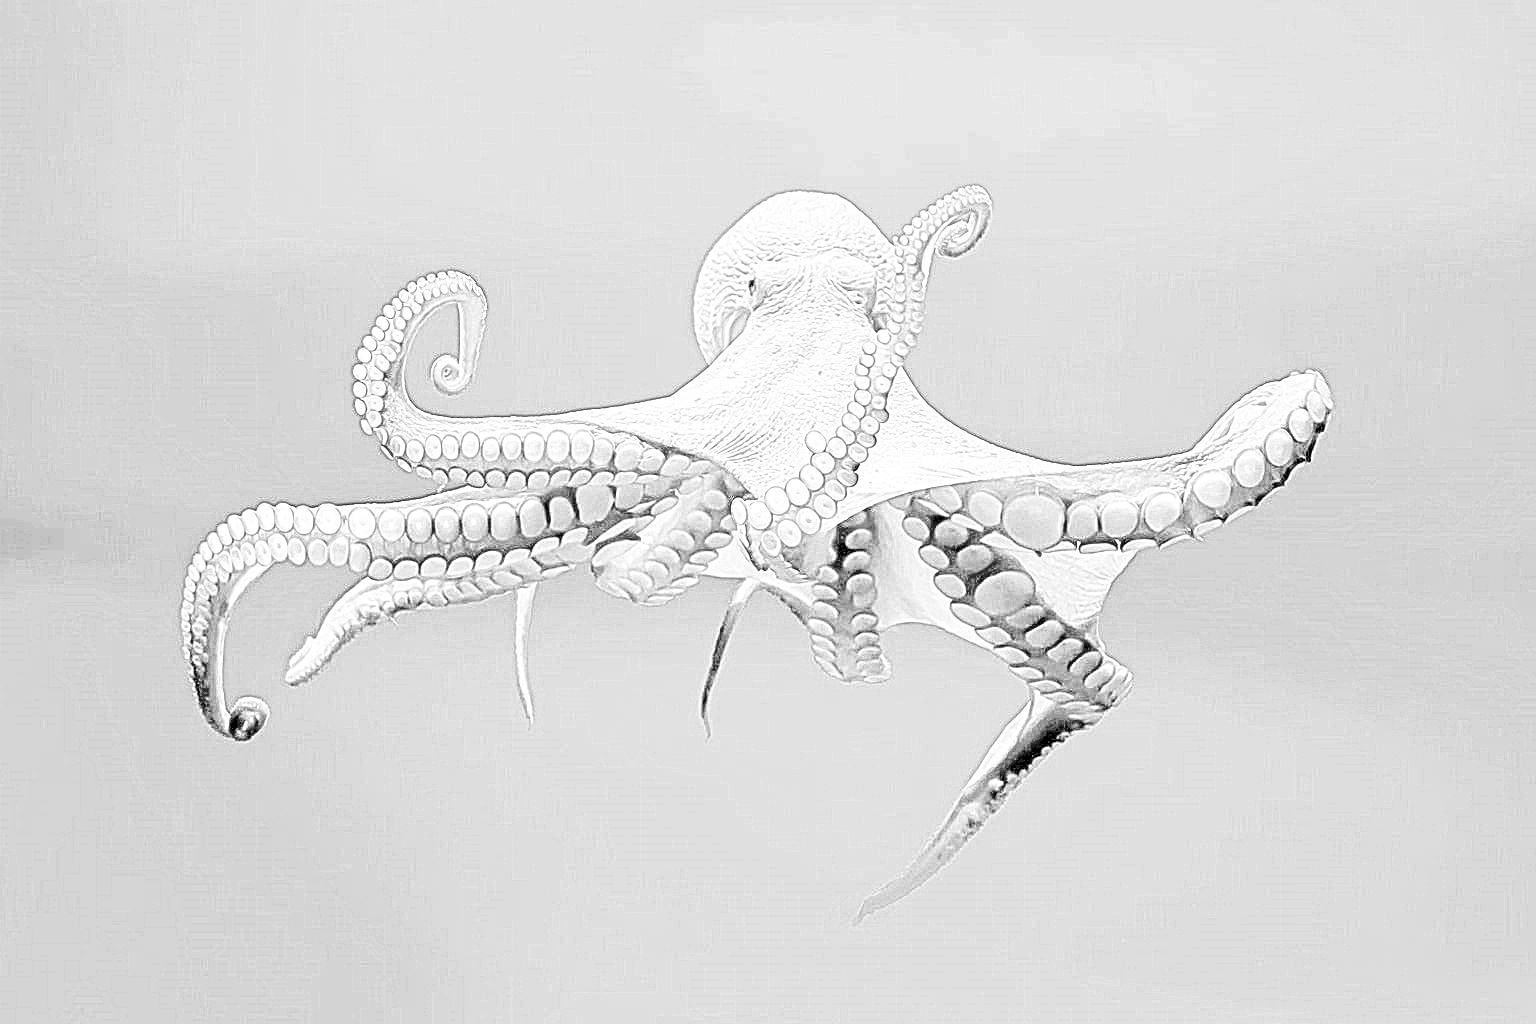 "Octopus image processed to look like a pencil sketch"